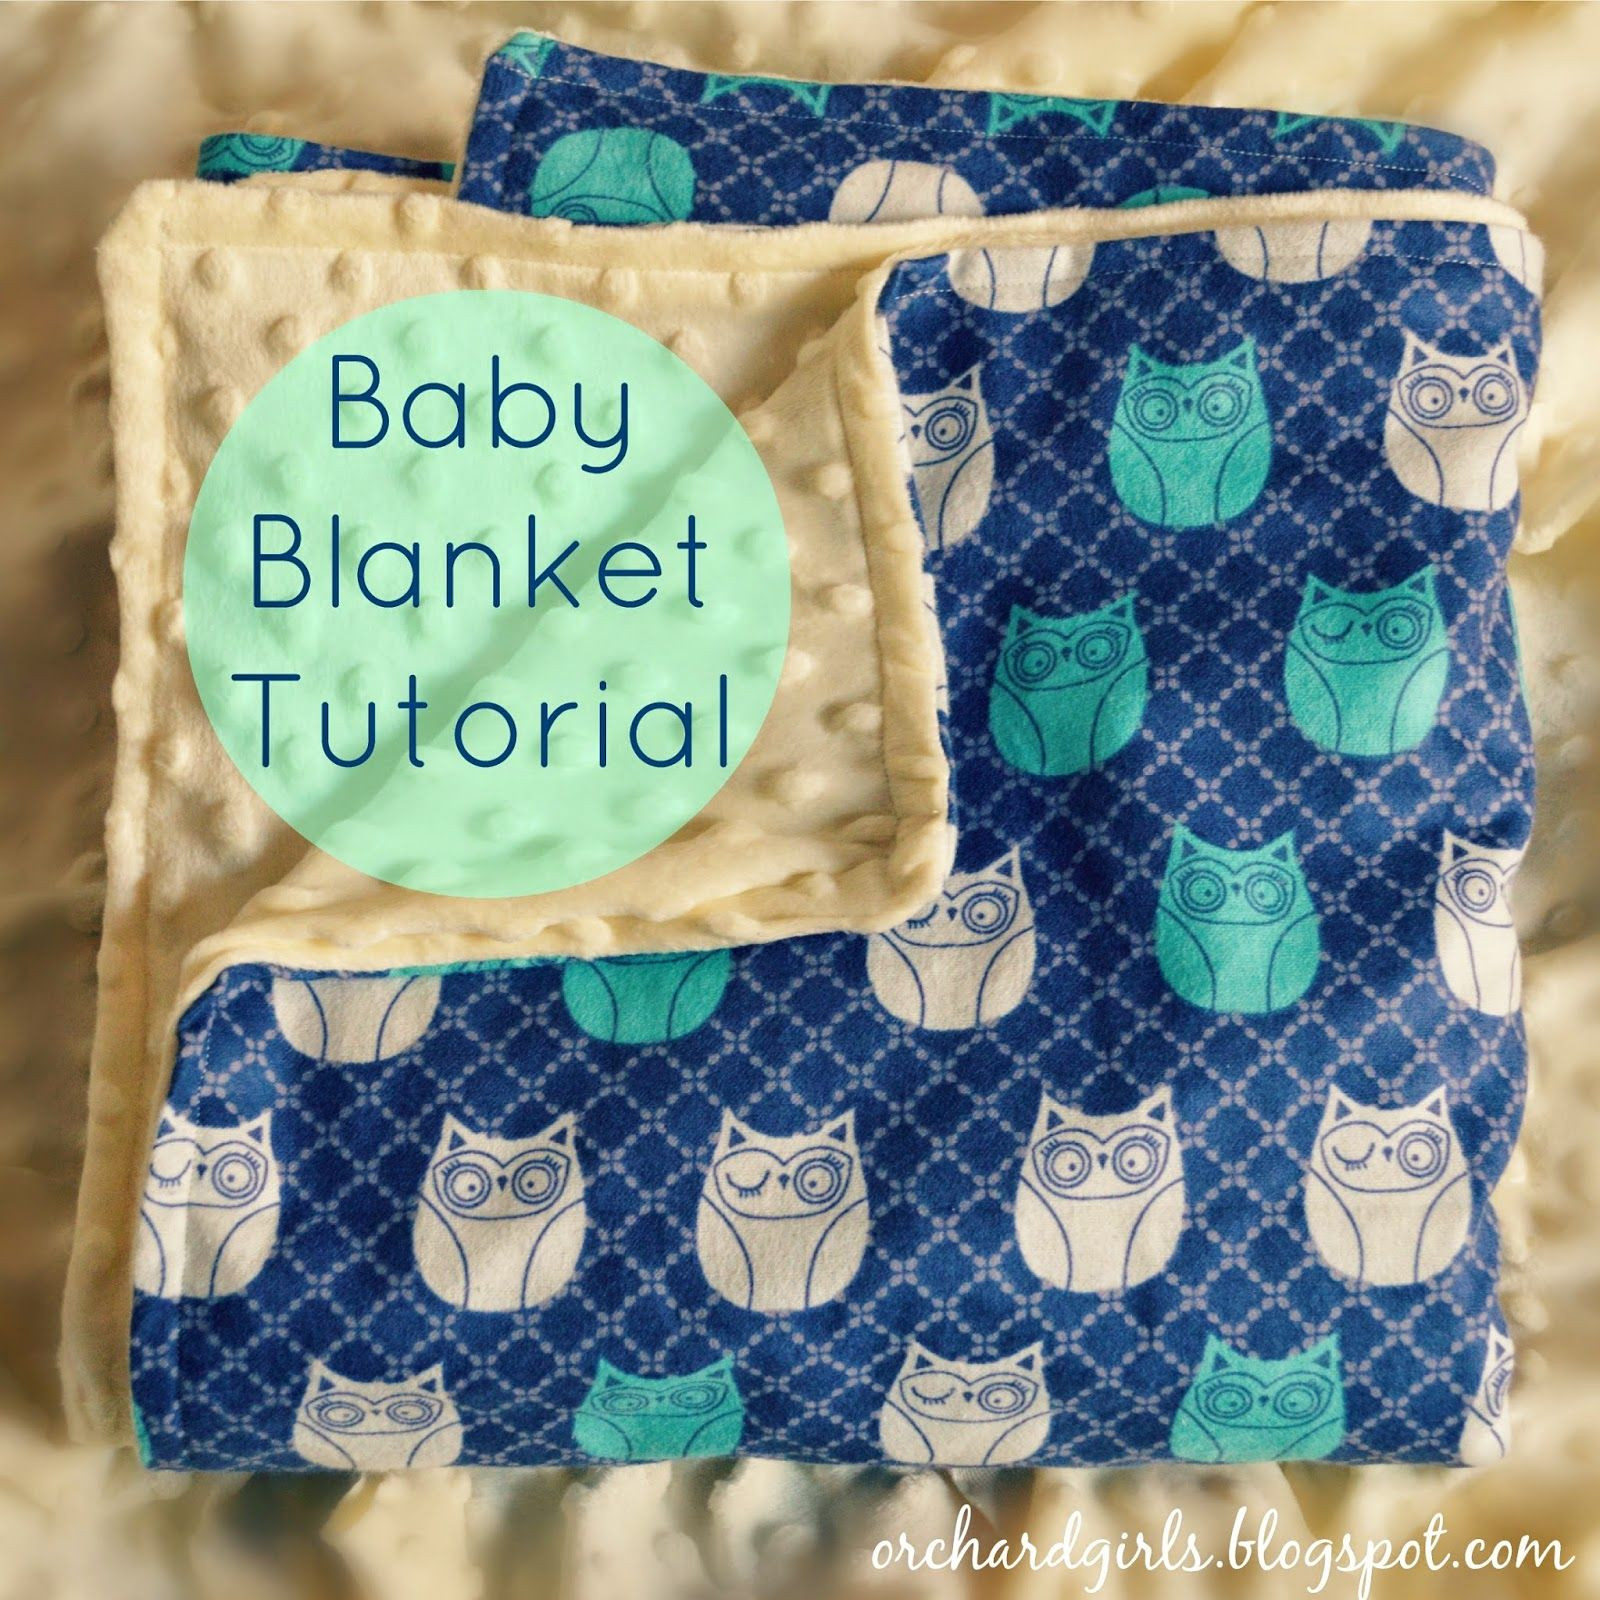 DIY Baby Blankets Ideas
 Orchard Girls Super easy DIY Baby Blanket Tutorial with